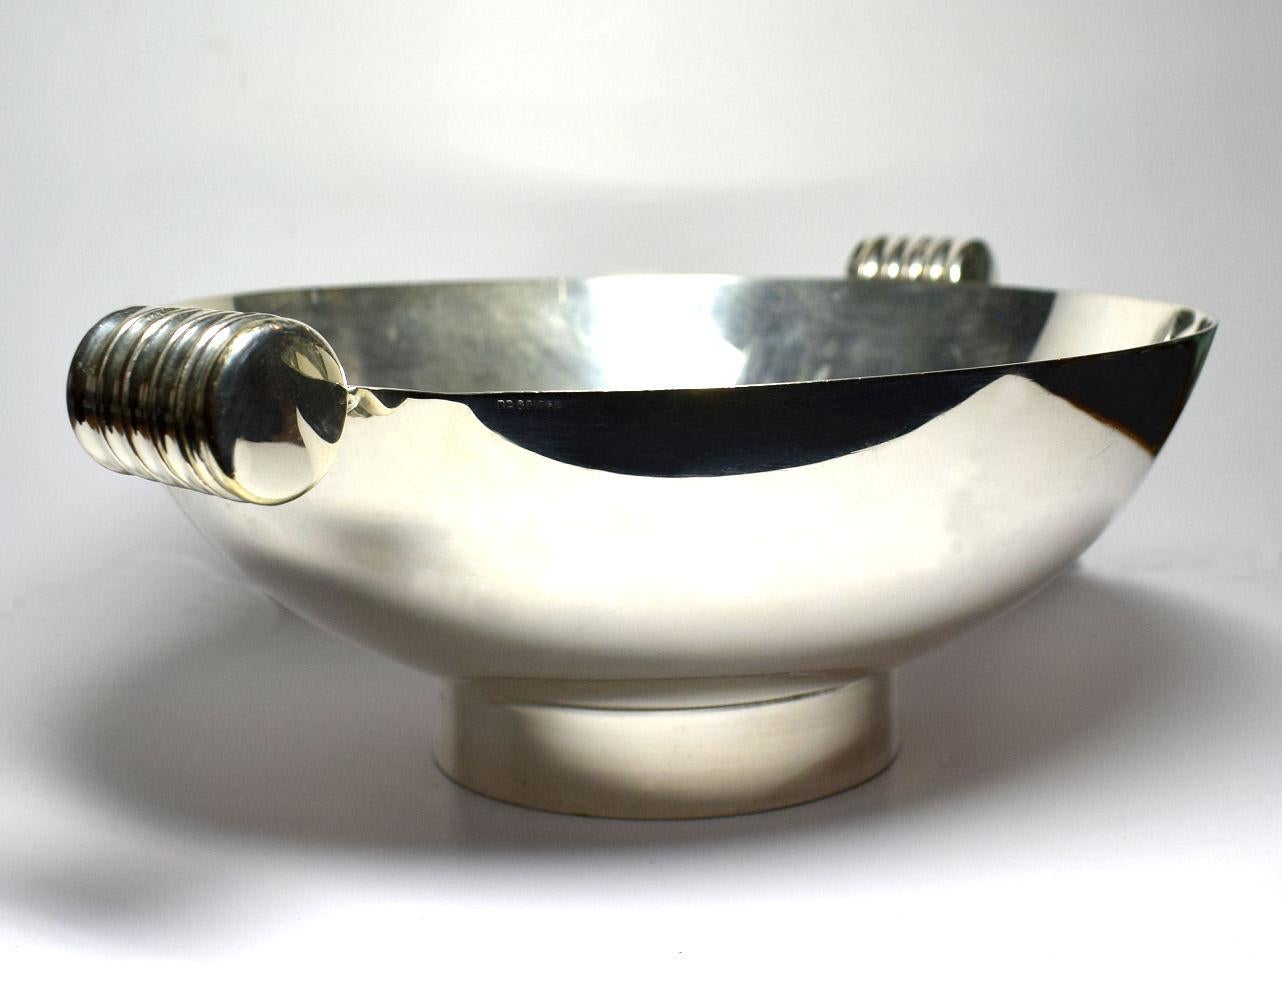 English Art Deco Modernist Silver Plated Bowl